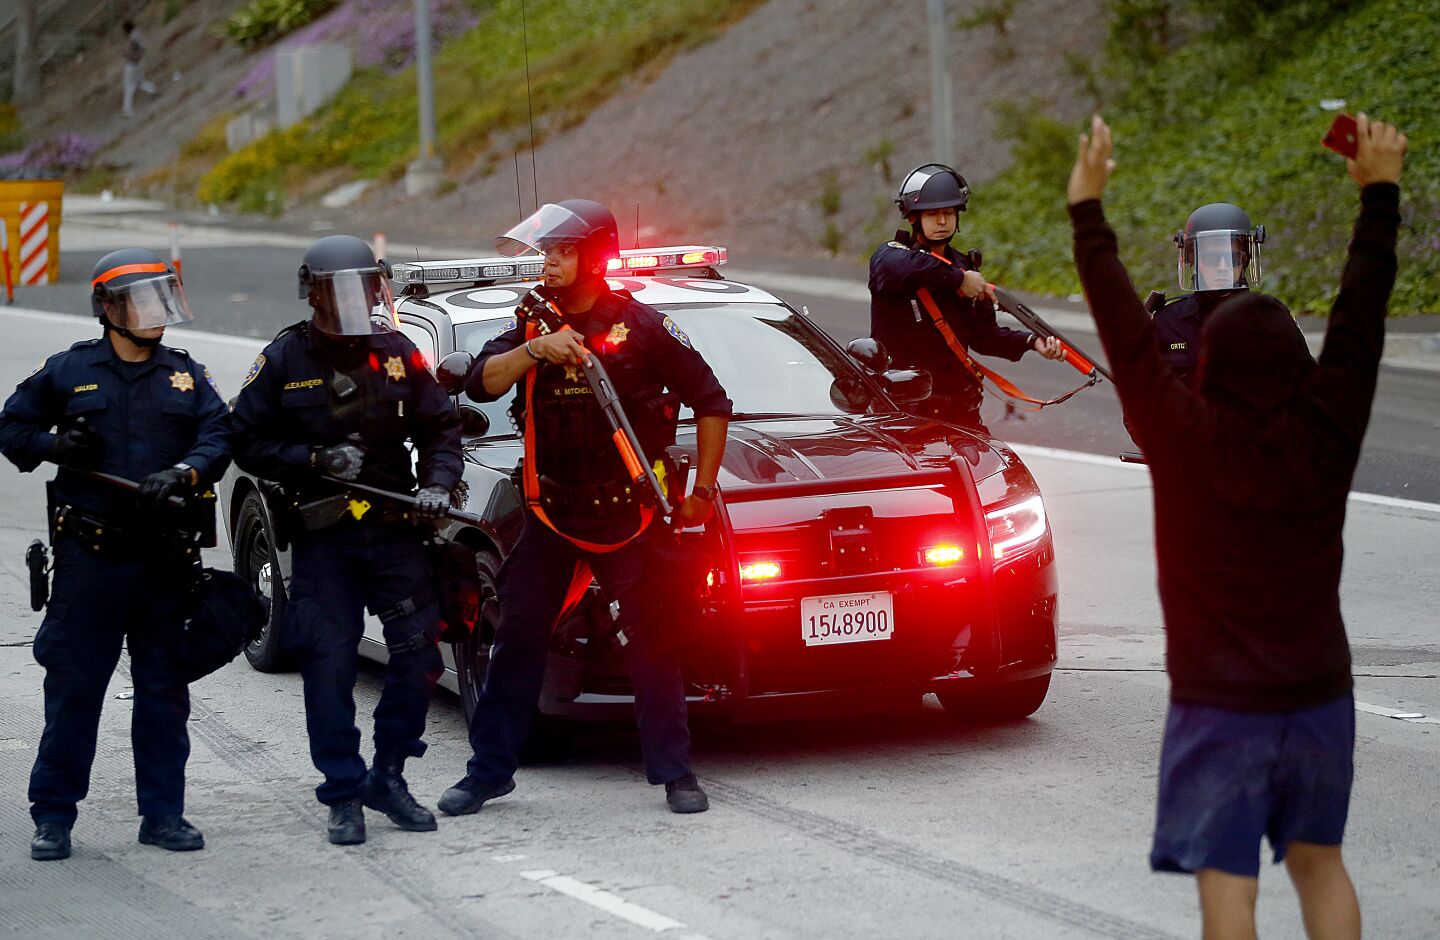 Police officers assume a defensive stance as a protester approaches them on the 110.